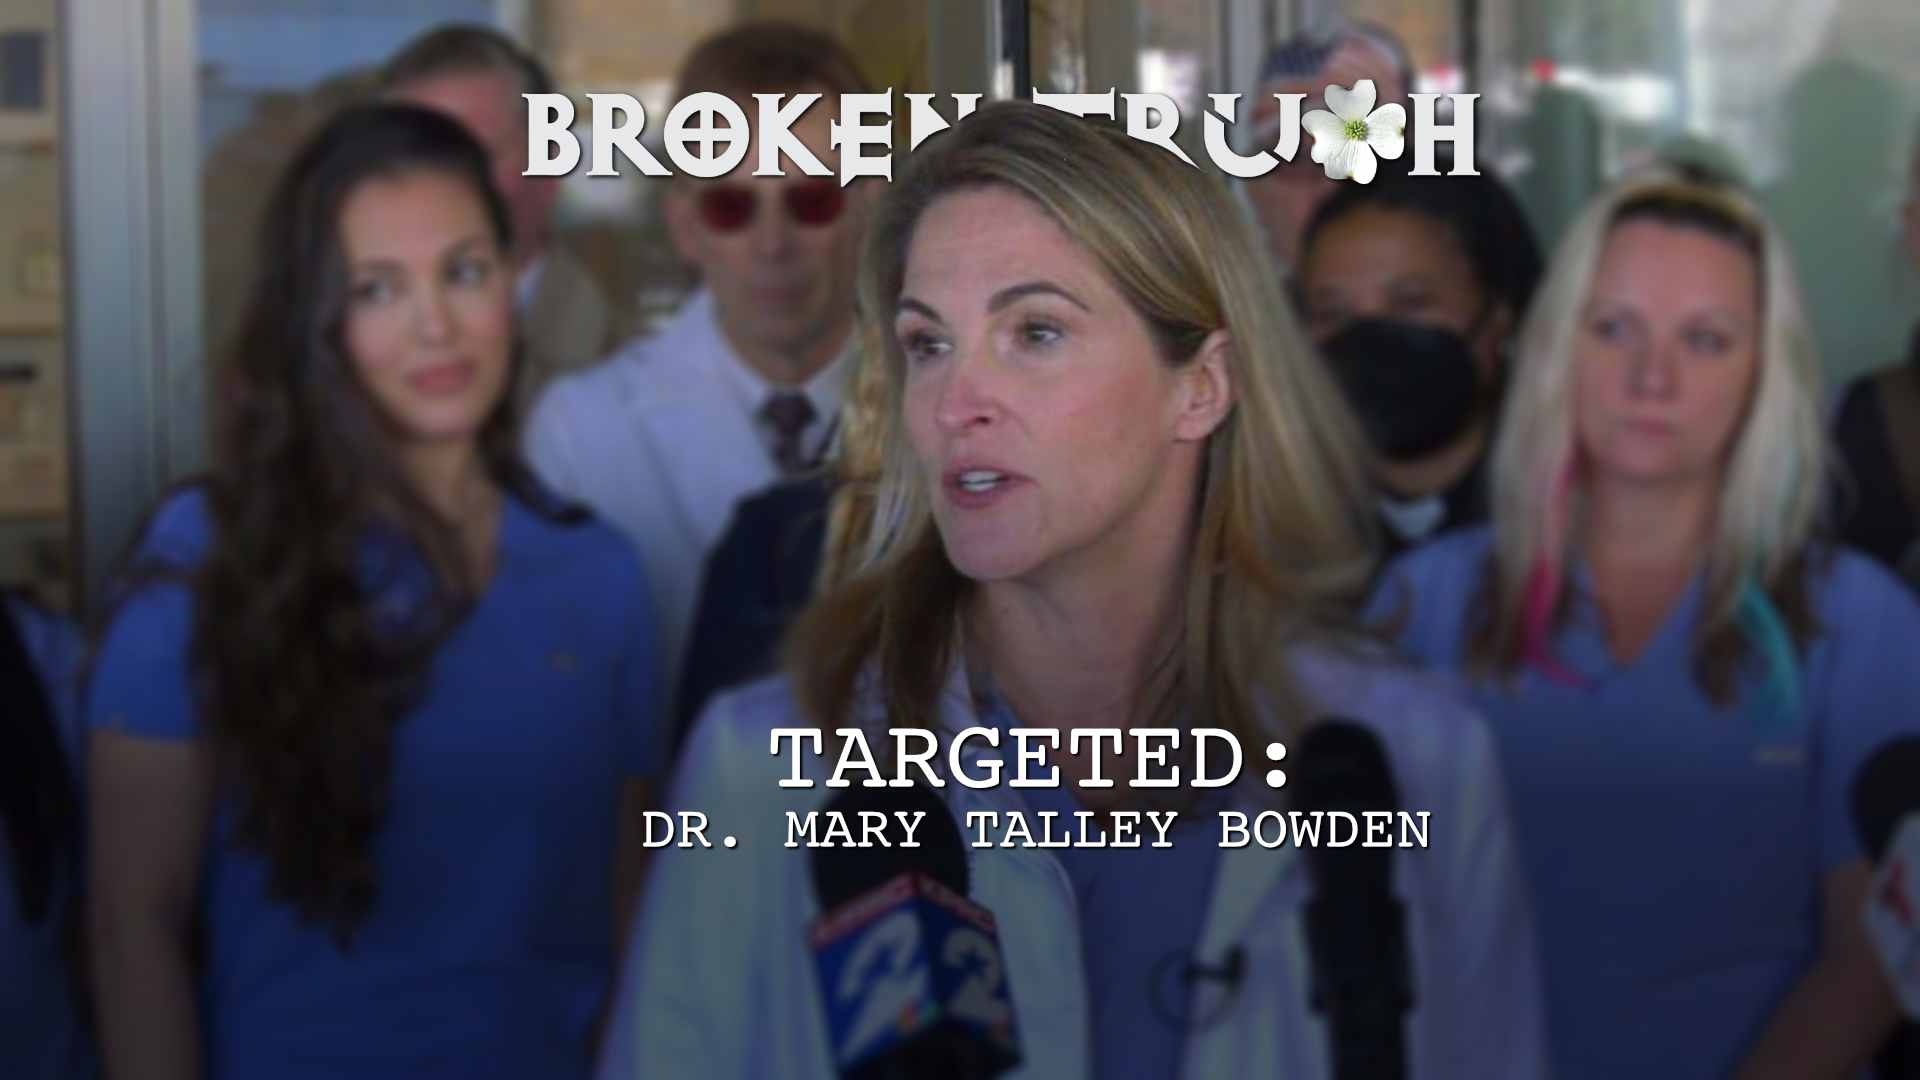 Targeted: Dr. Mary Talley Bowden